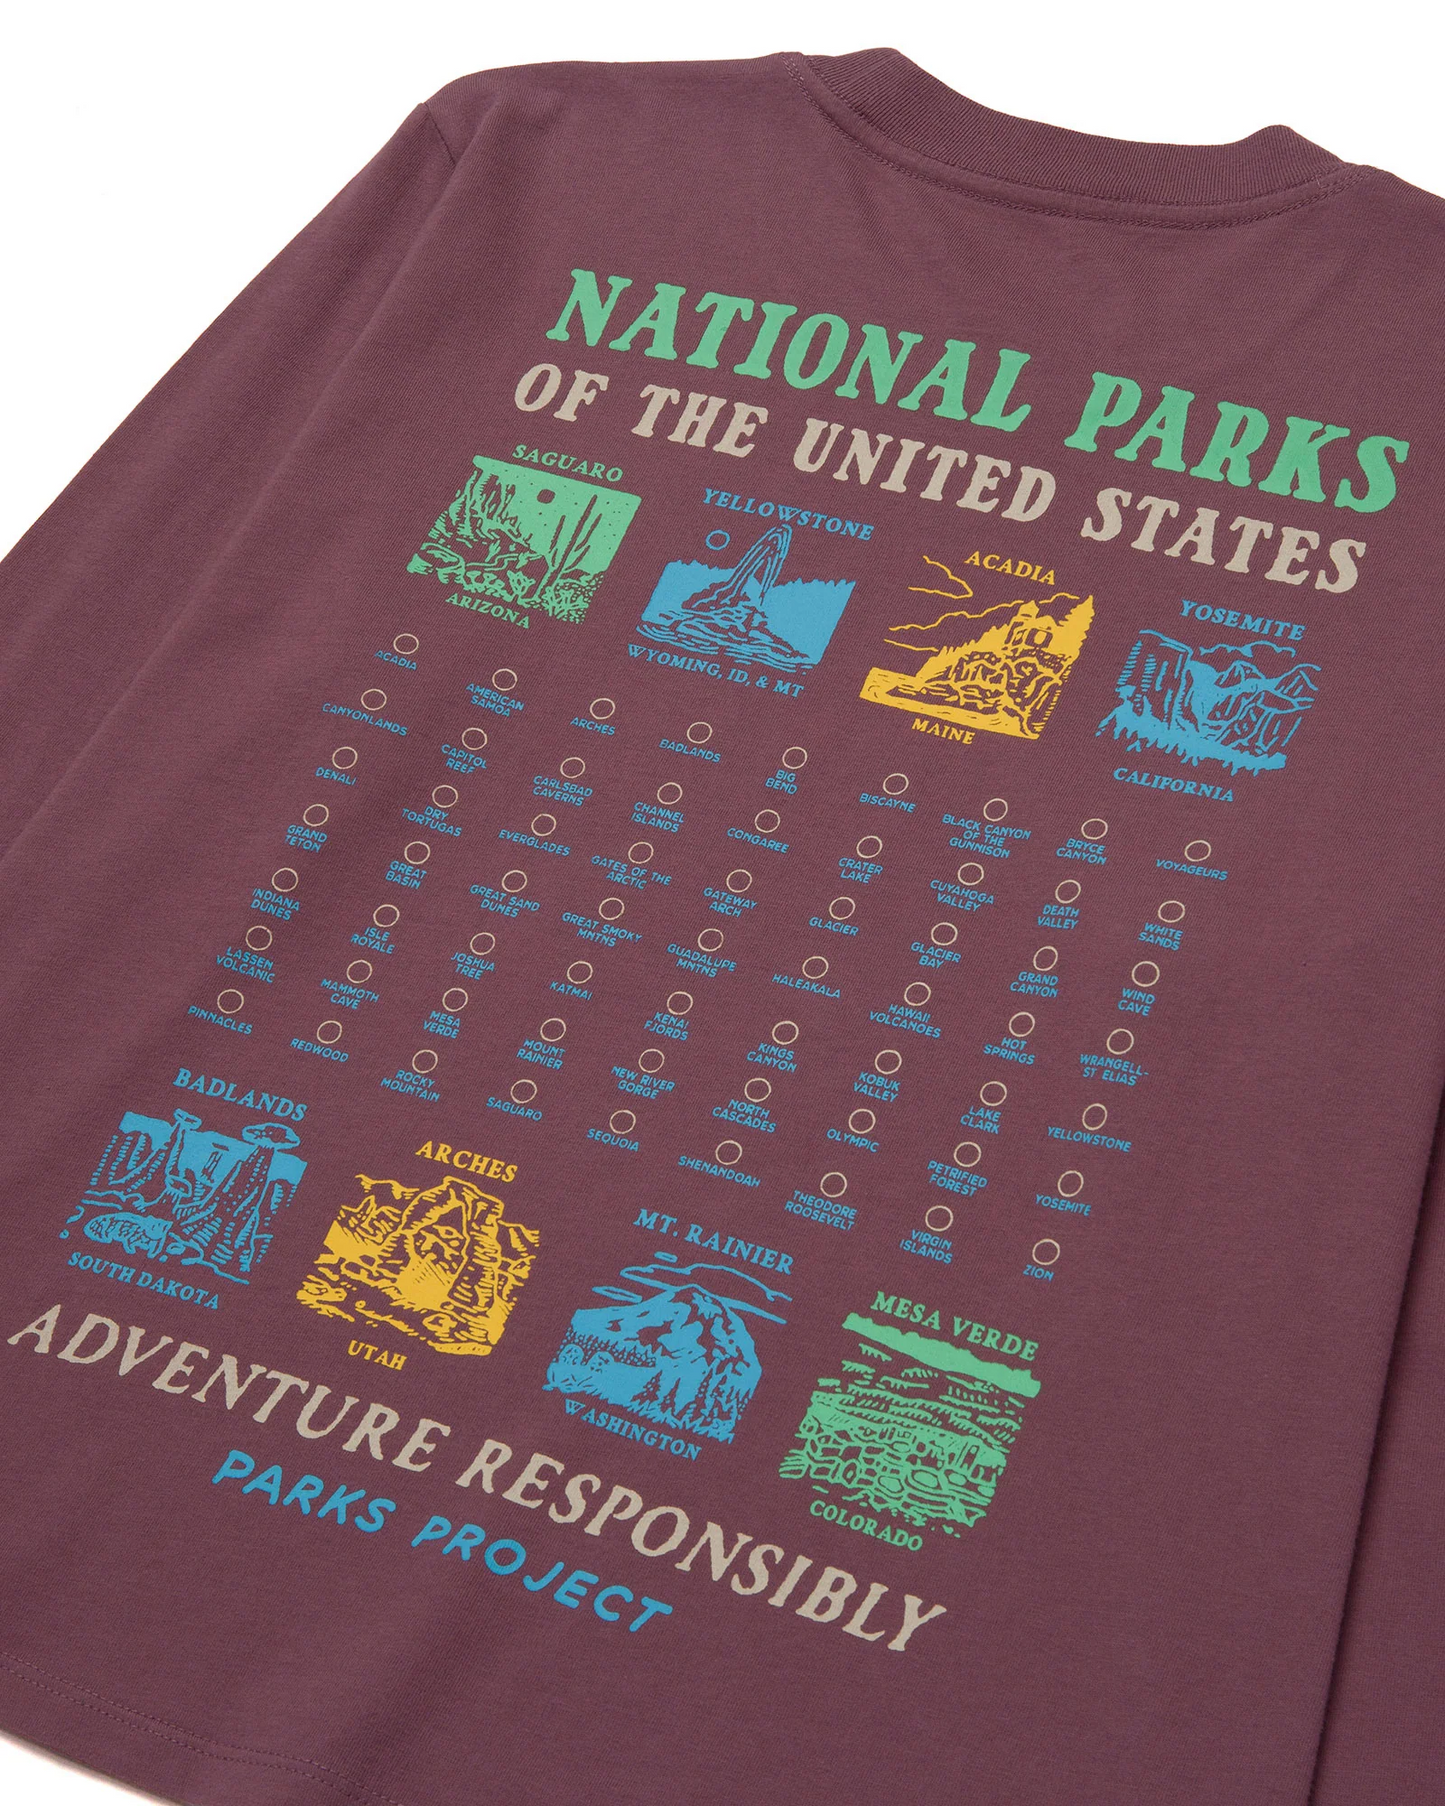 Parks Project National Parks Stacked Boxy Long Sleeve Tee